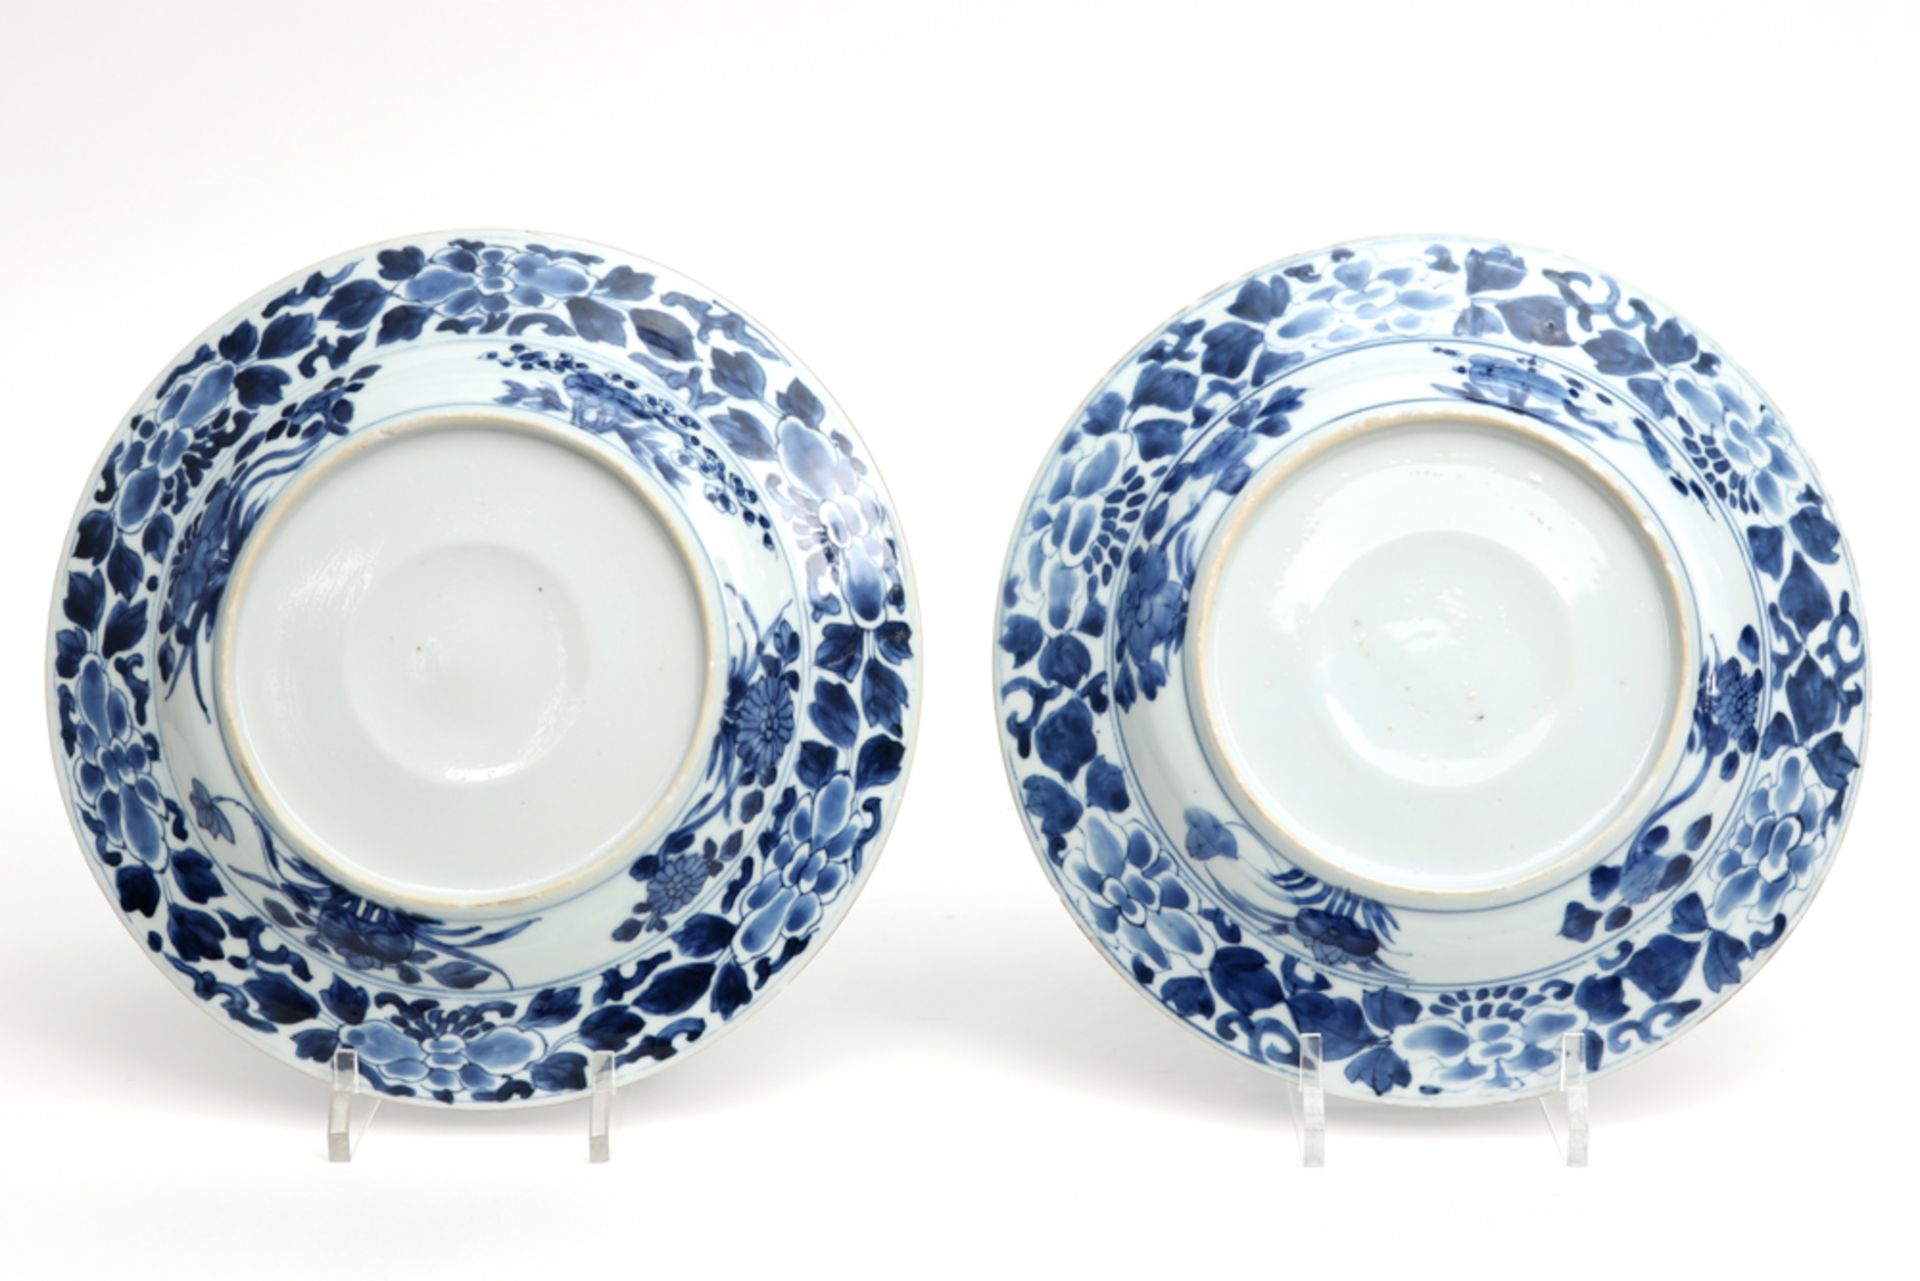 pair of 17th/18th Cent. Chinese Kang Hsi period dishes (with domed center) in porcelain with a - Image 2 of 2